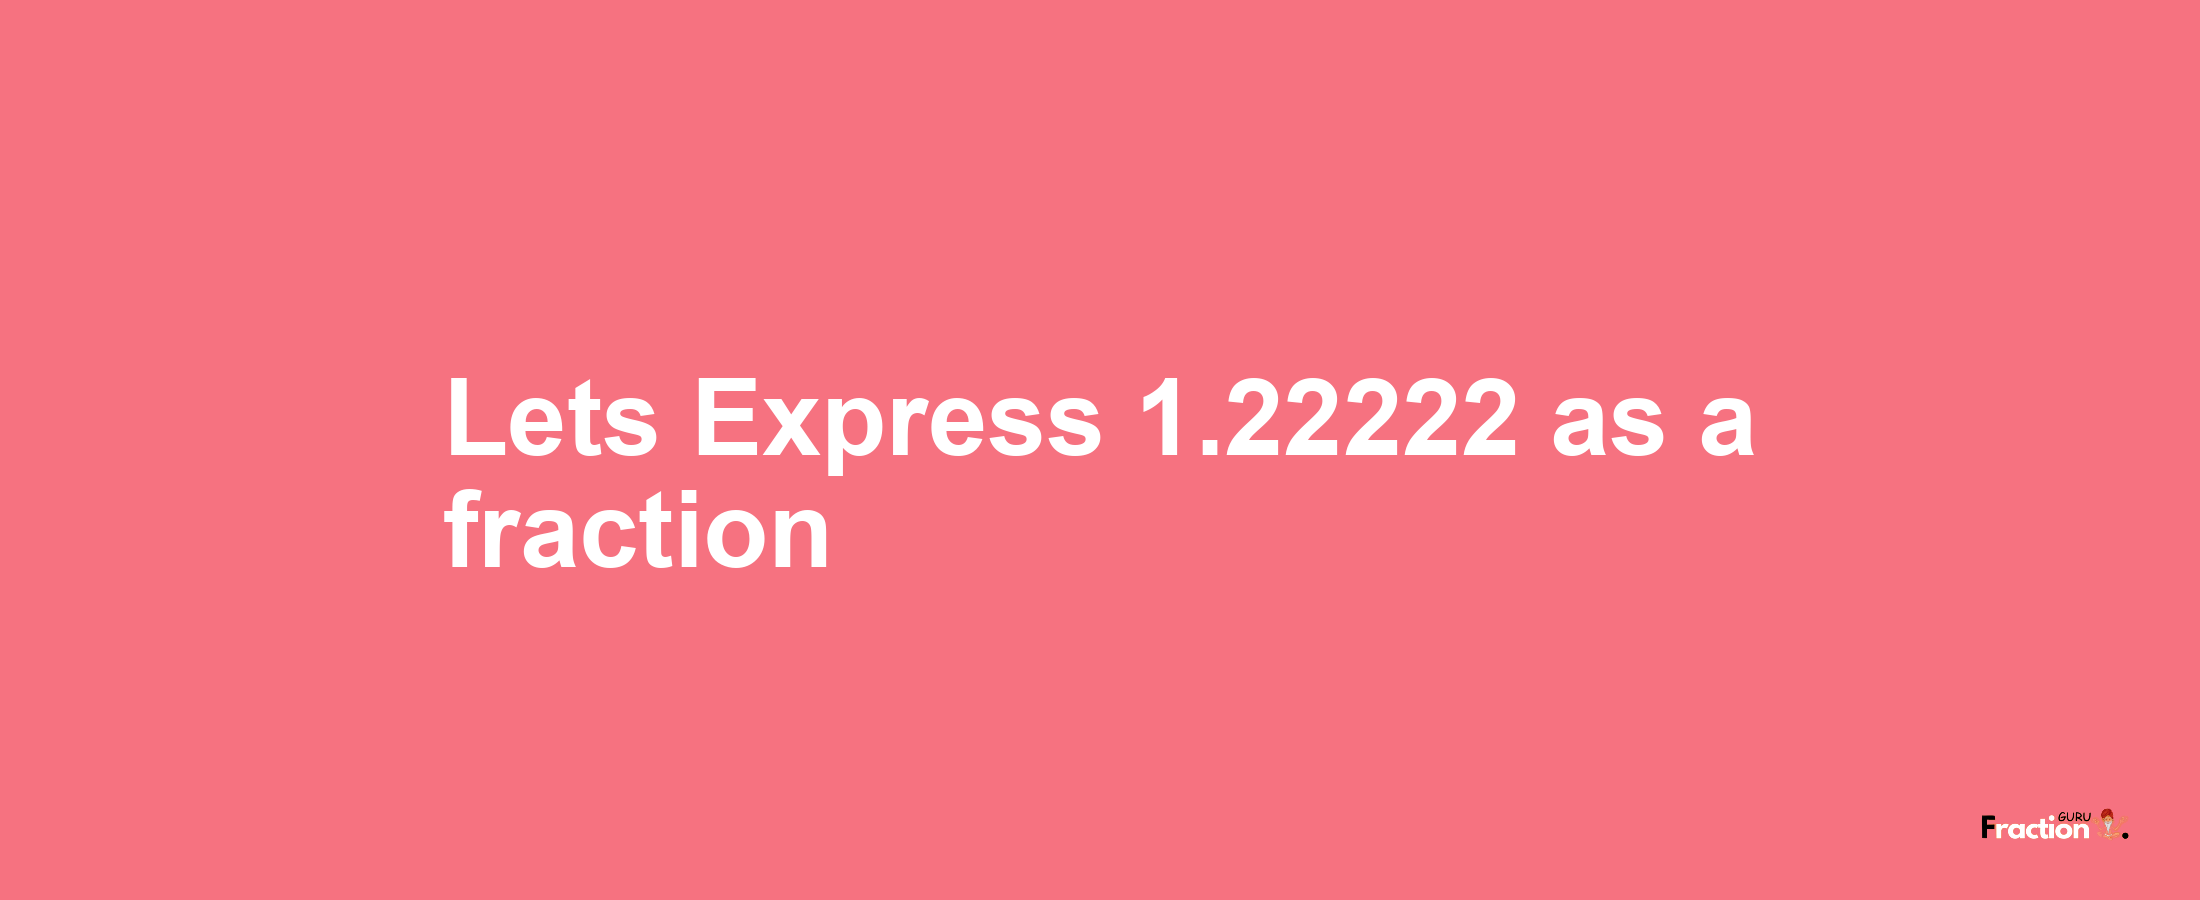 Lets Express 1.22222 as afraction